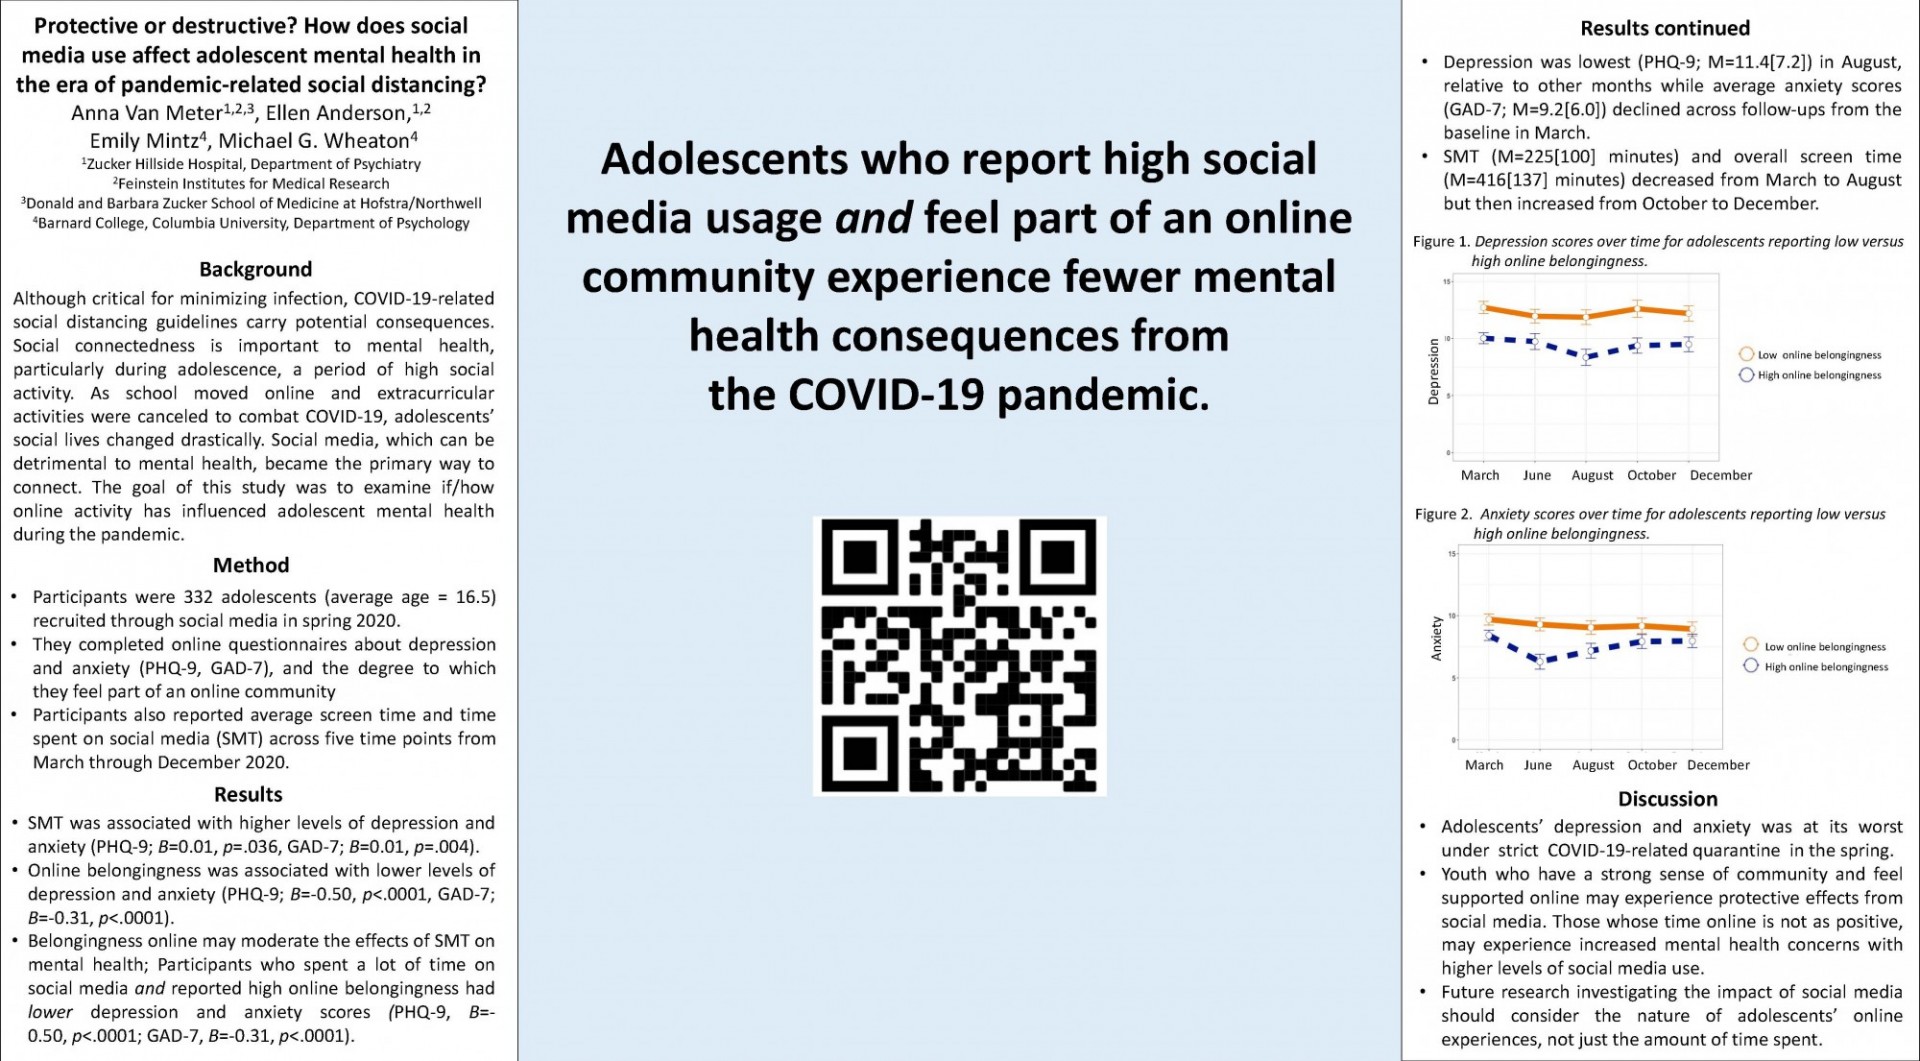 Protective or destructive? How does social media use affect adolescent mental health in the era of pandemic-related social distancing? 